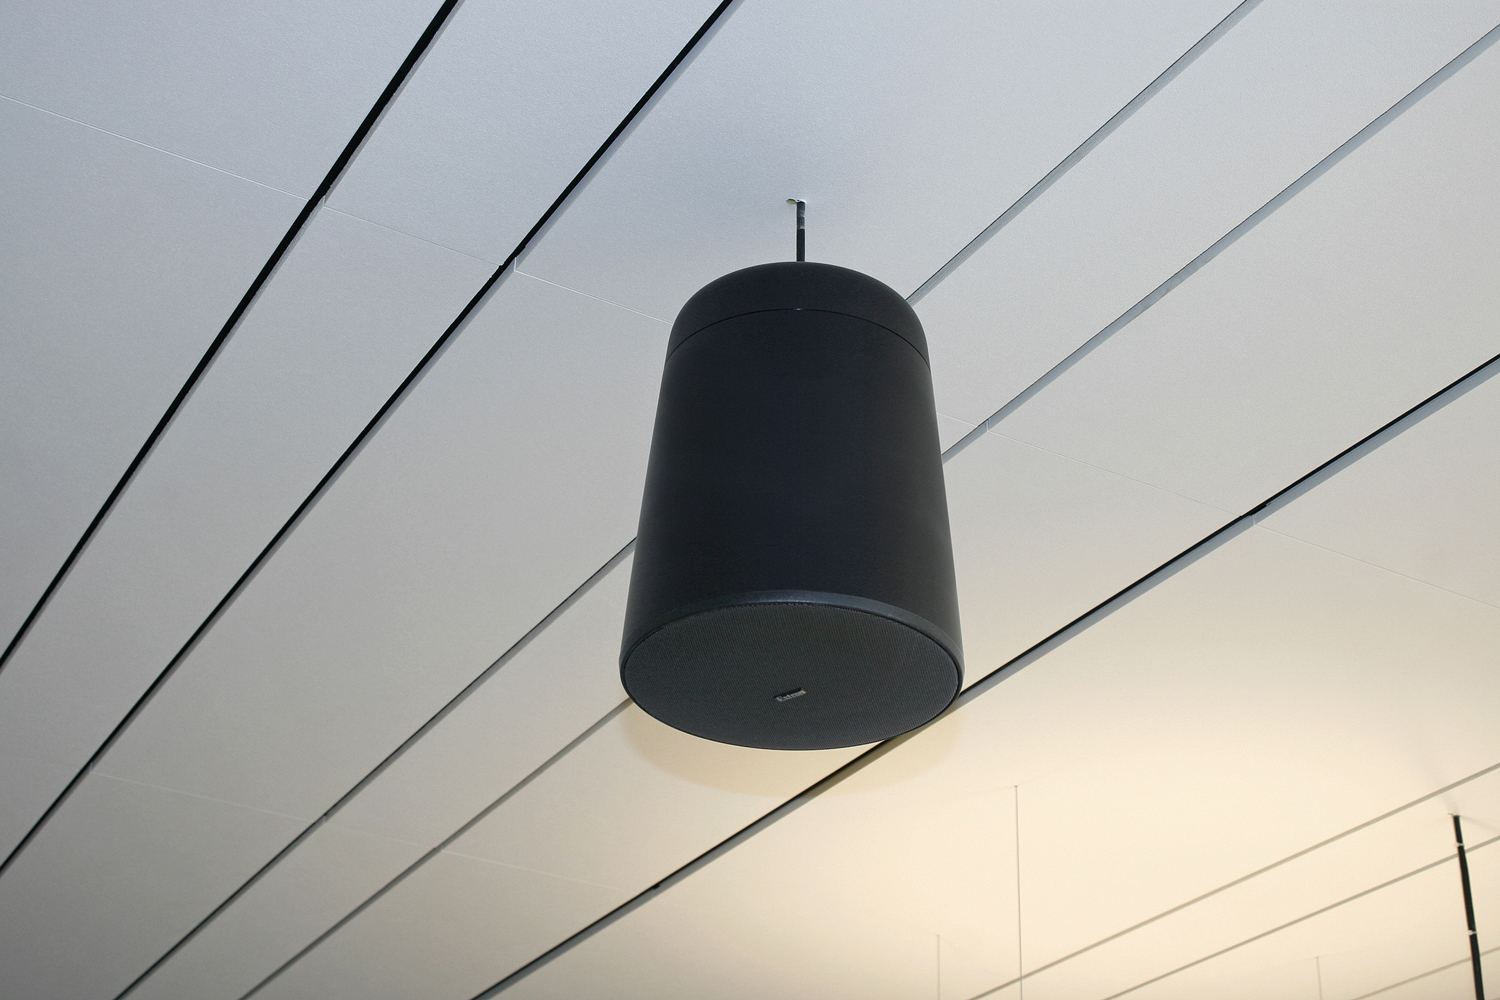 The SF 26PT pendant speakers have the discreet appearance of modern lighting, allowing them to be hidden in plain sight.